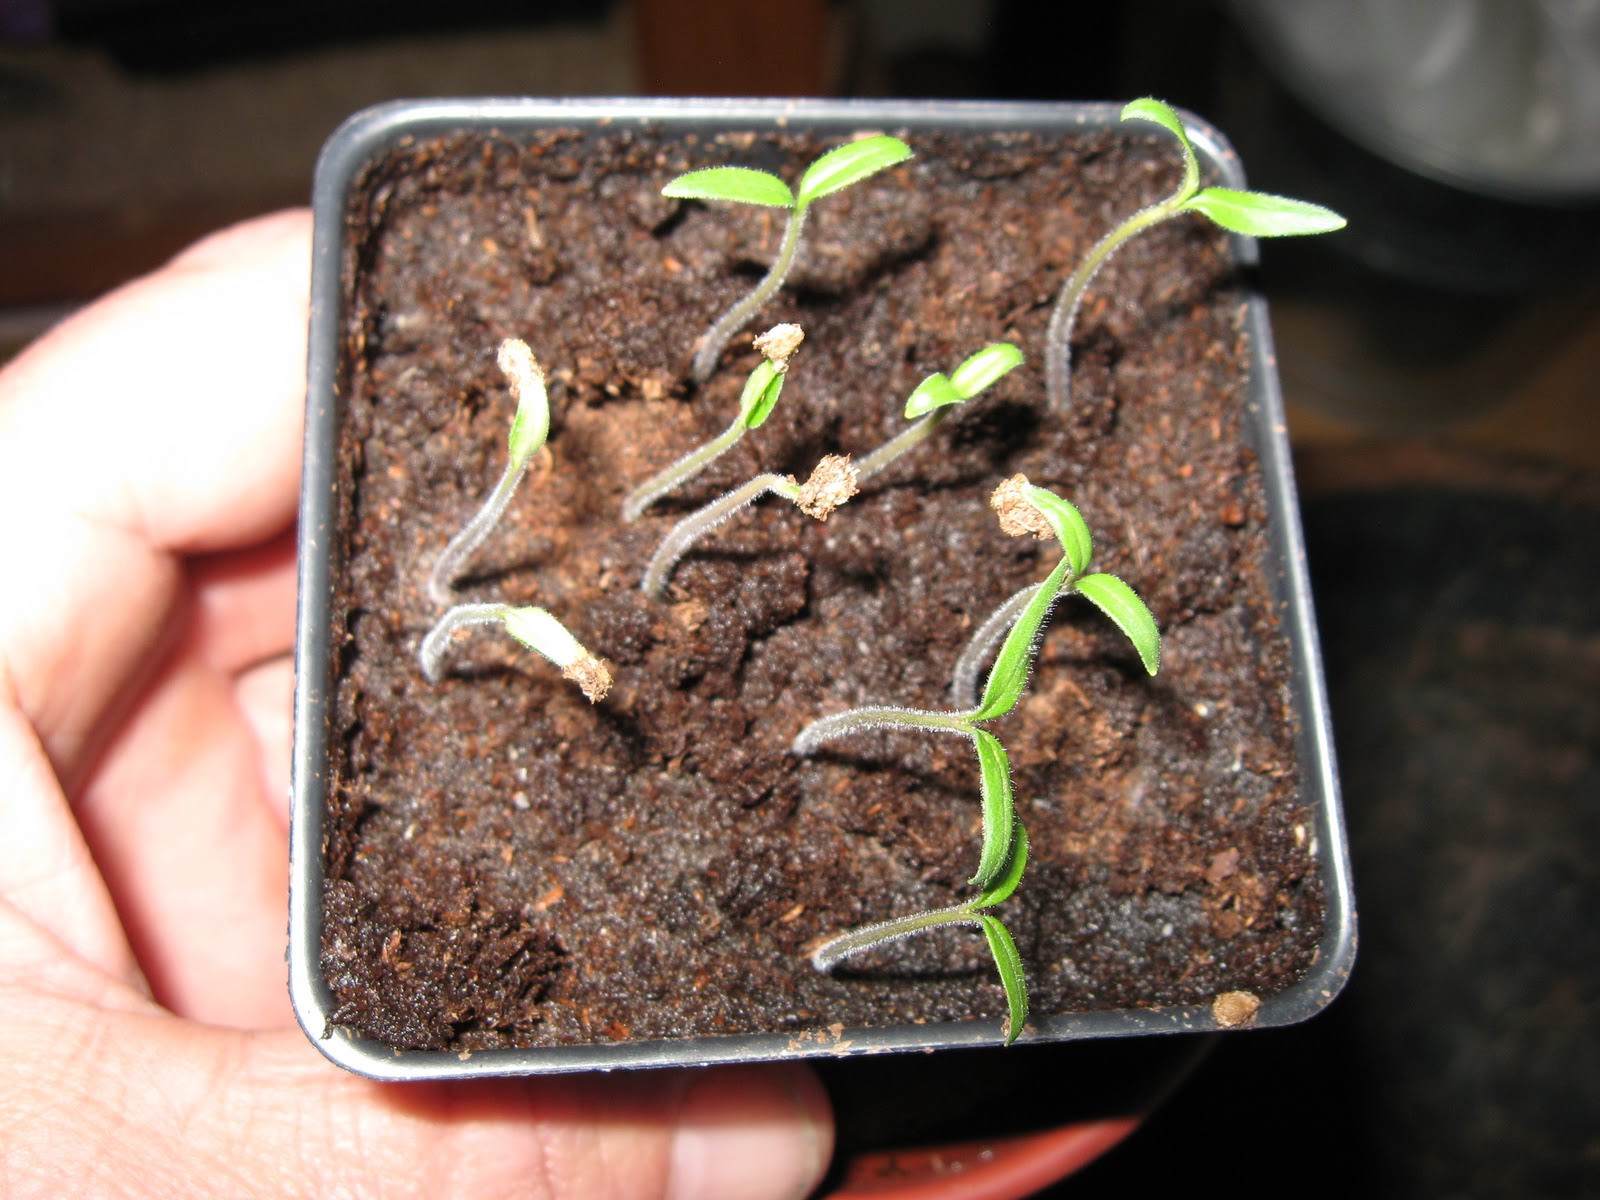 Dusty River Gardens: Checking My Tomato Seeds For Germination part 1